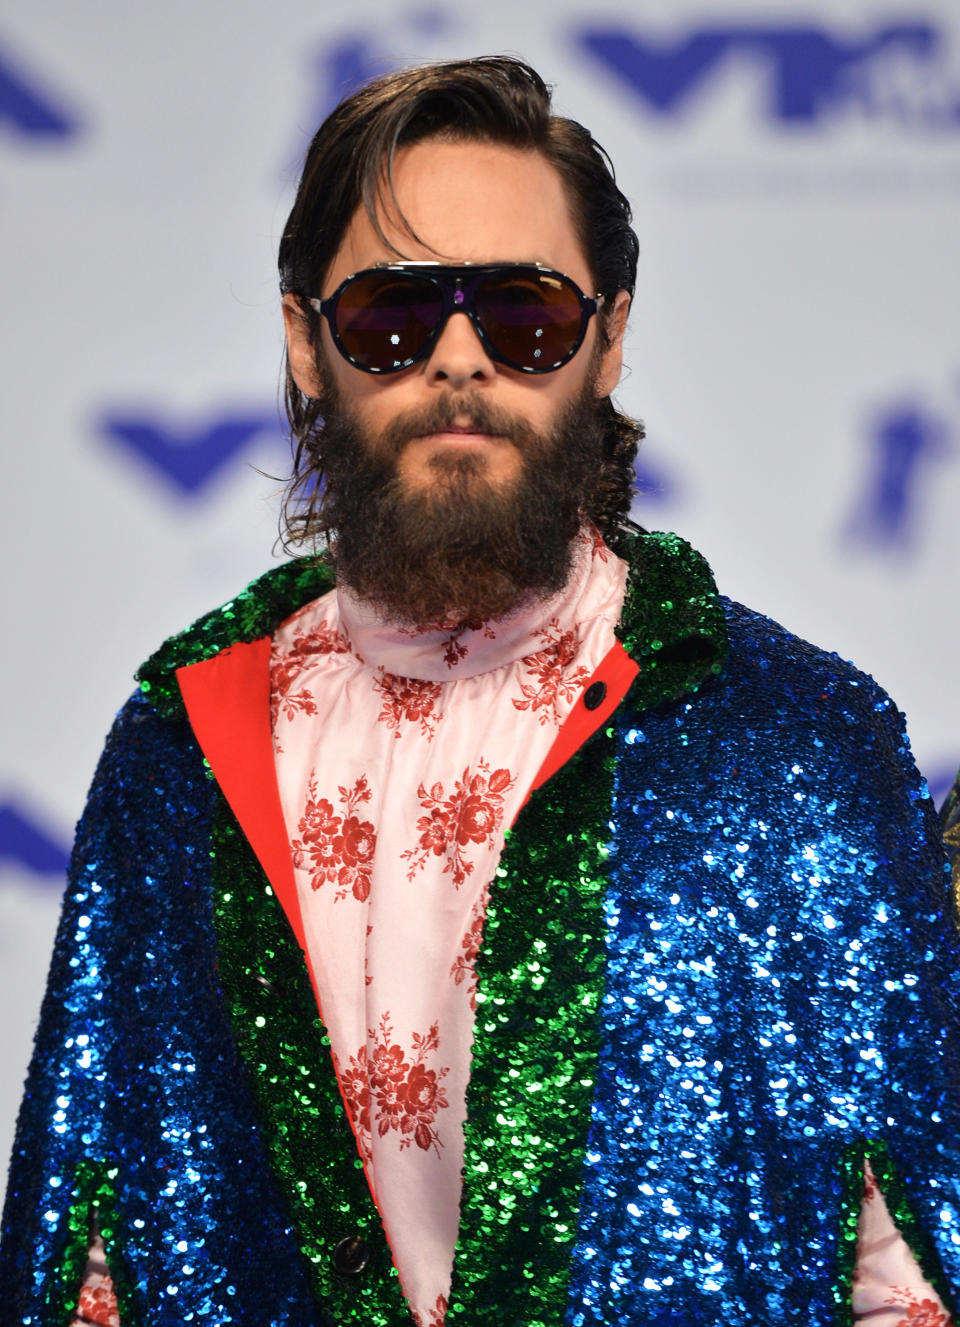 Jared Leto at the Video Music Awards in 2017